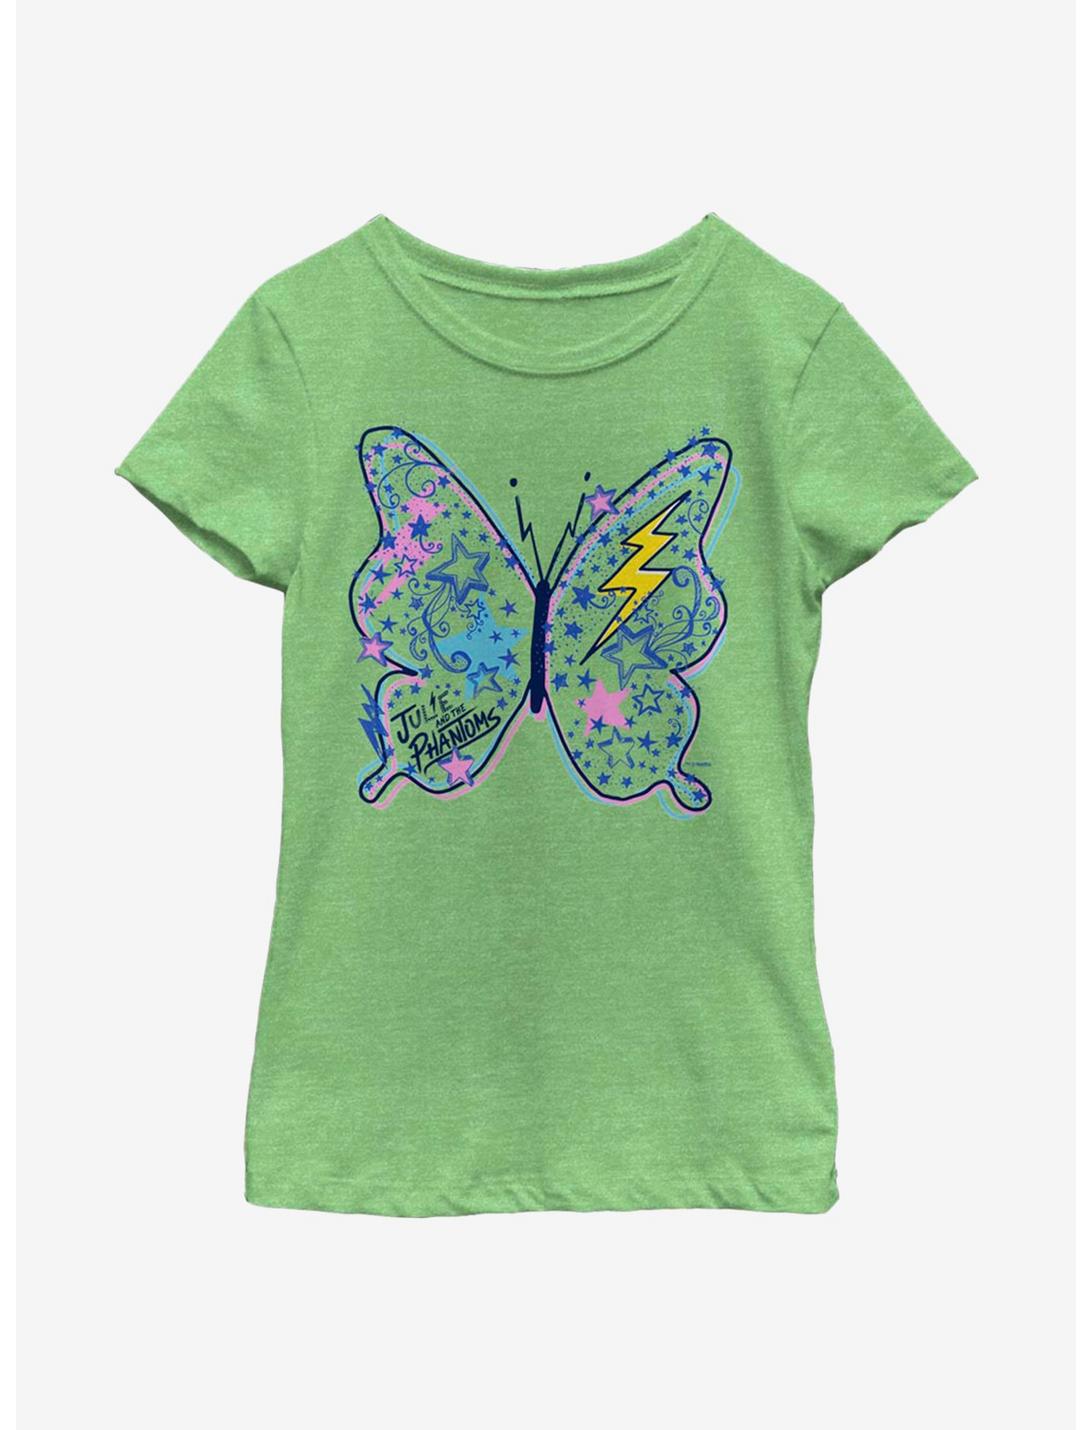 Julie And The Phantoms Butterfly Doodle Youth Girls T-Shirt, GRN APPLE, hi-res